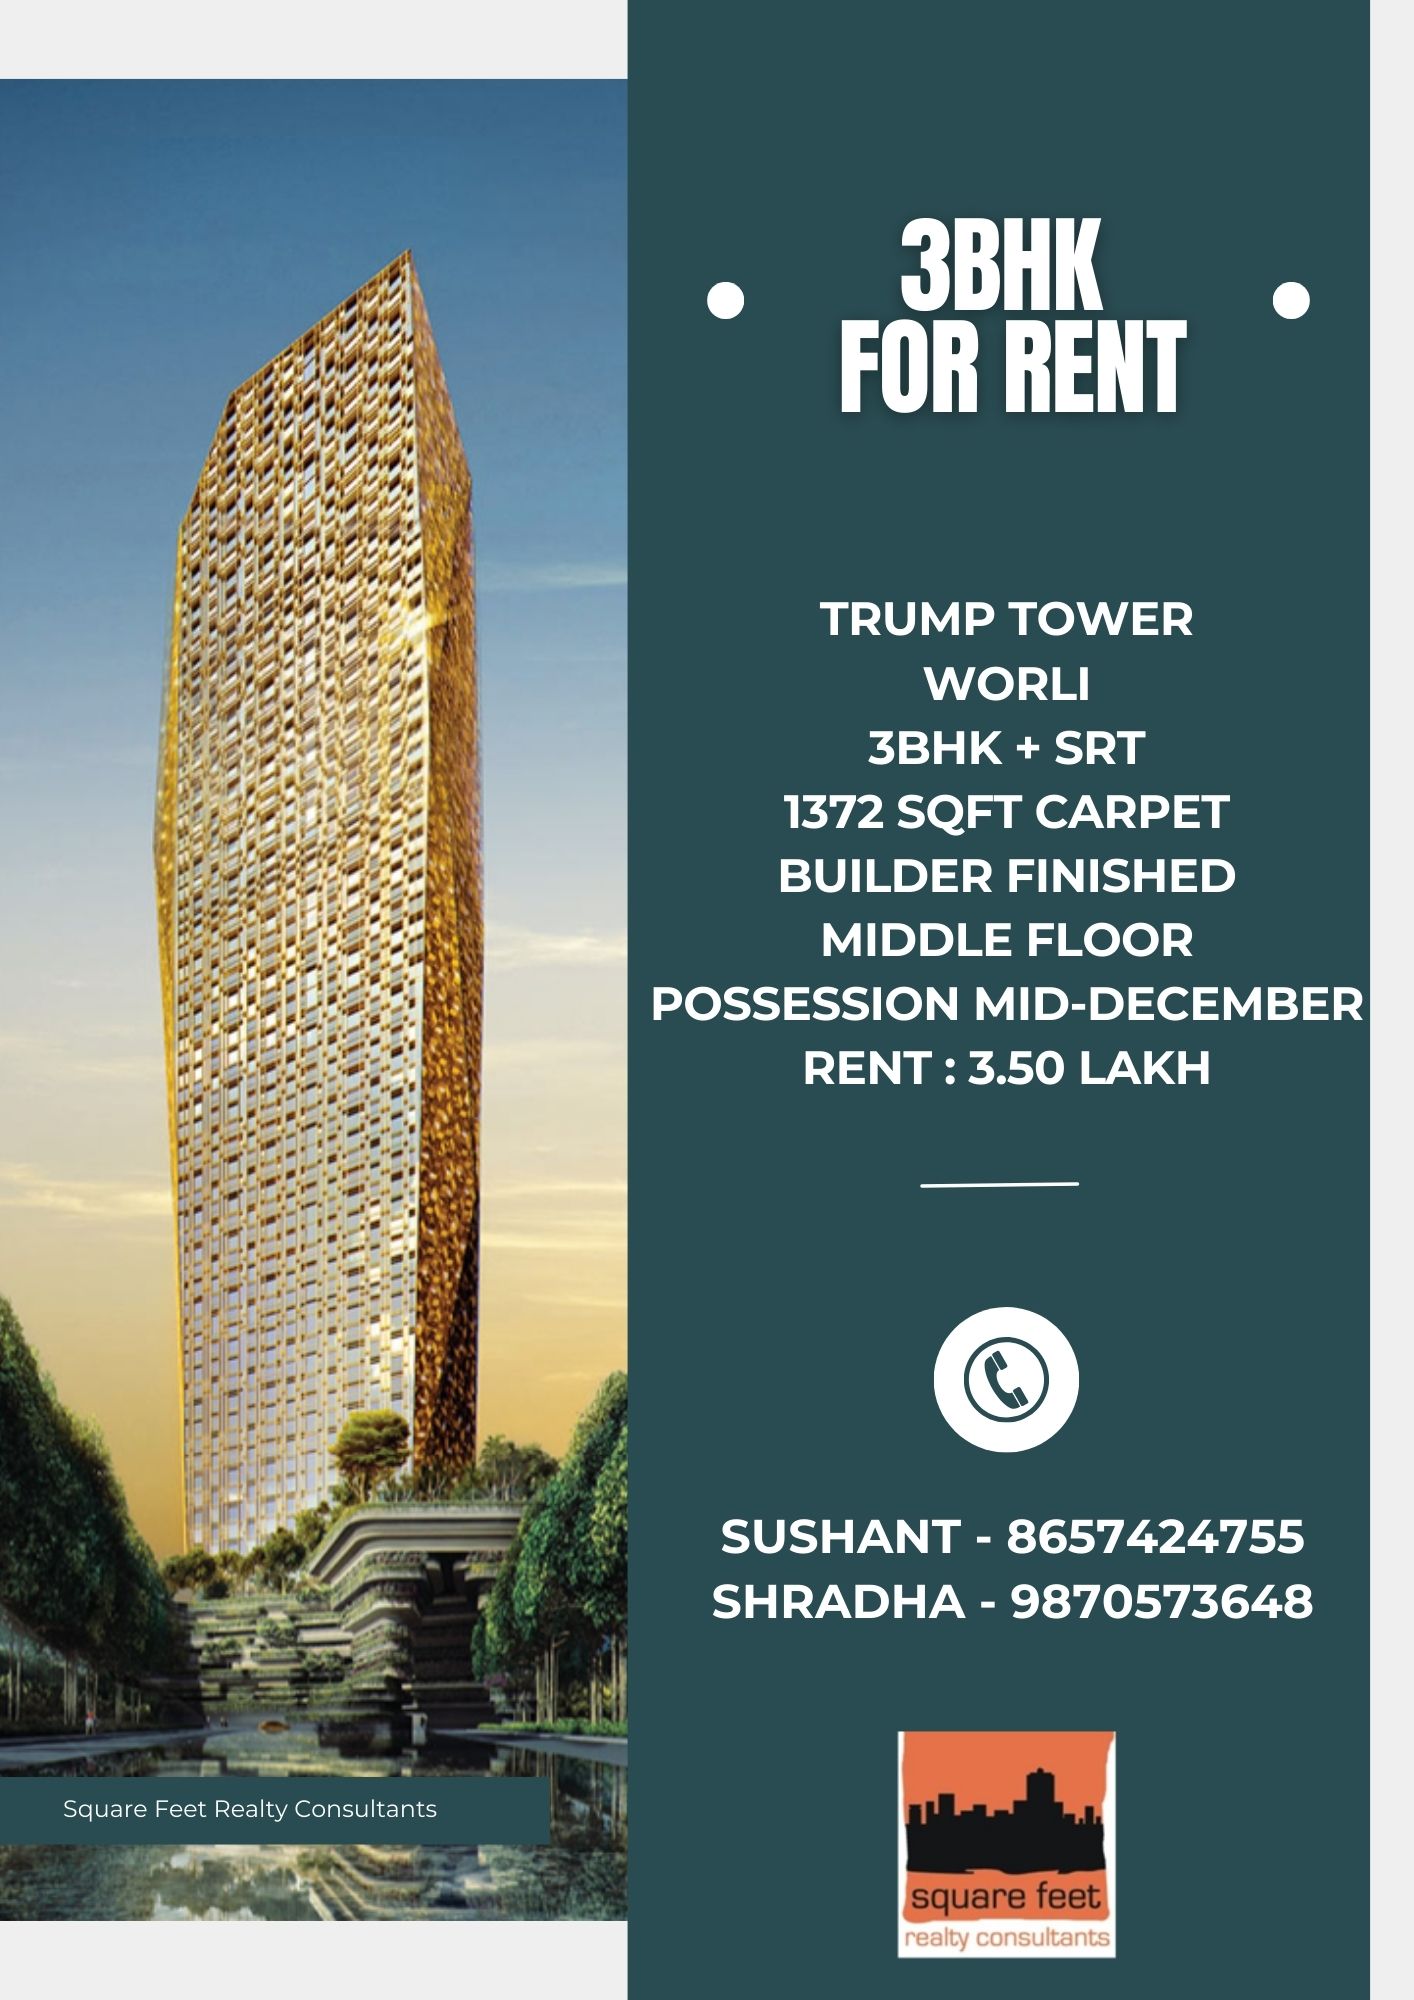 3BHK for Rent in Lodha Trump Tower @3.50 Lakhs